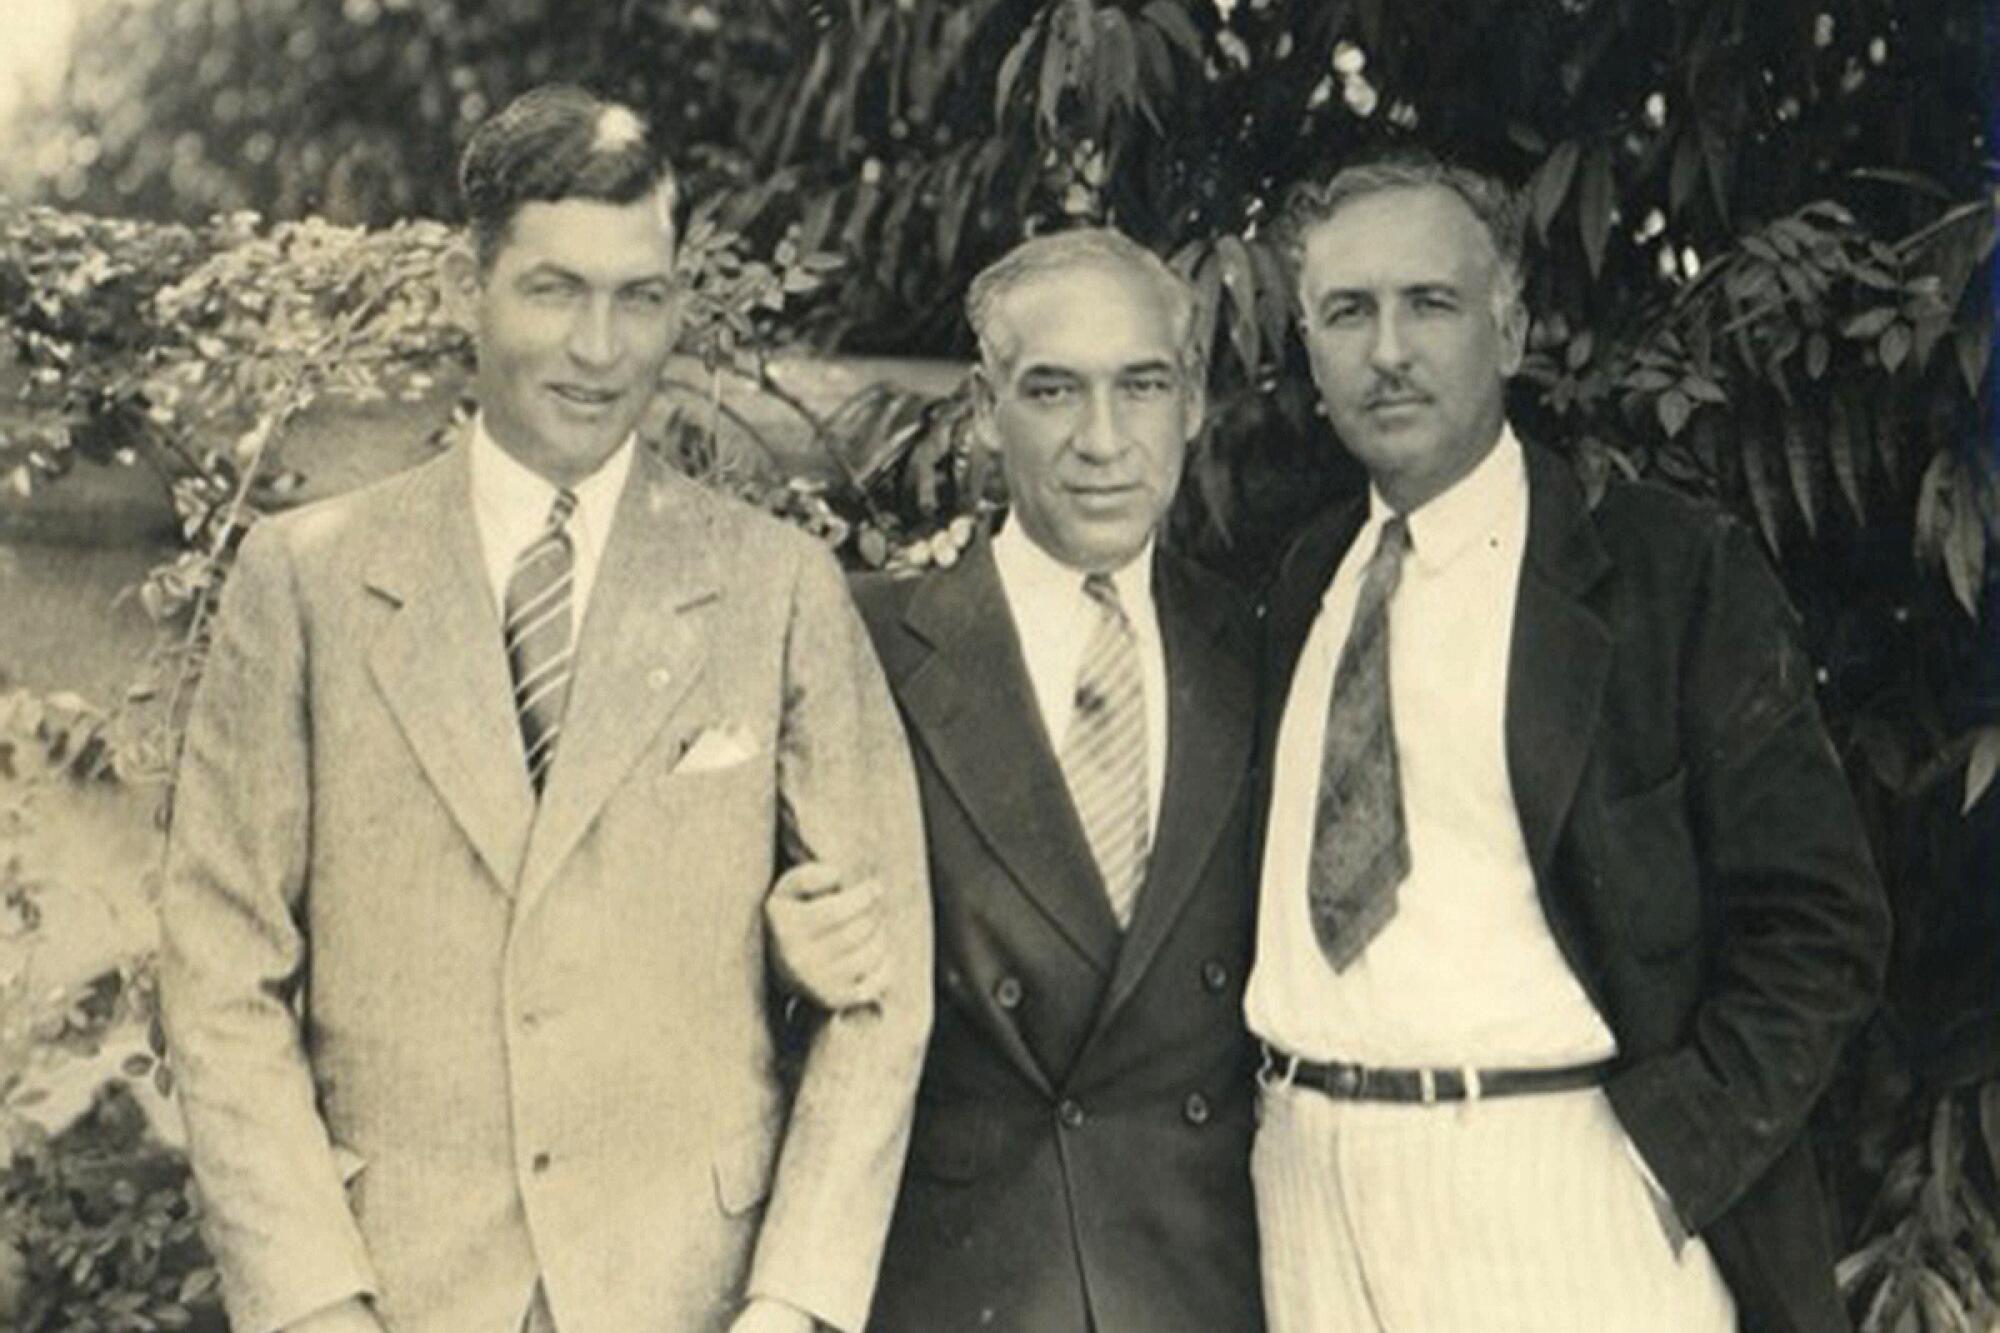 Three men in suits, standing outdoors, in a vintage black-and-white photo.